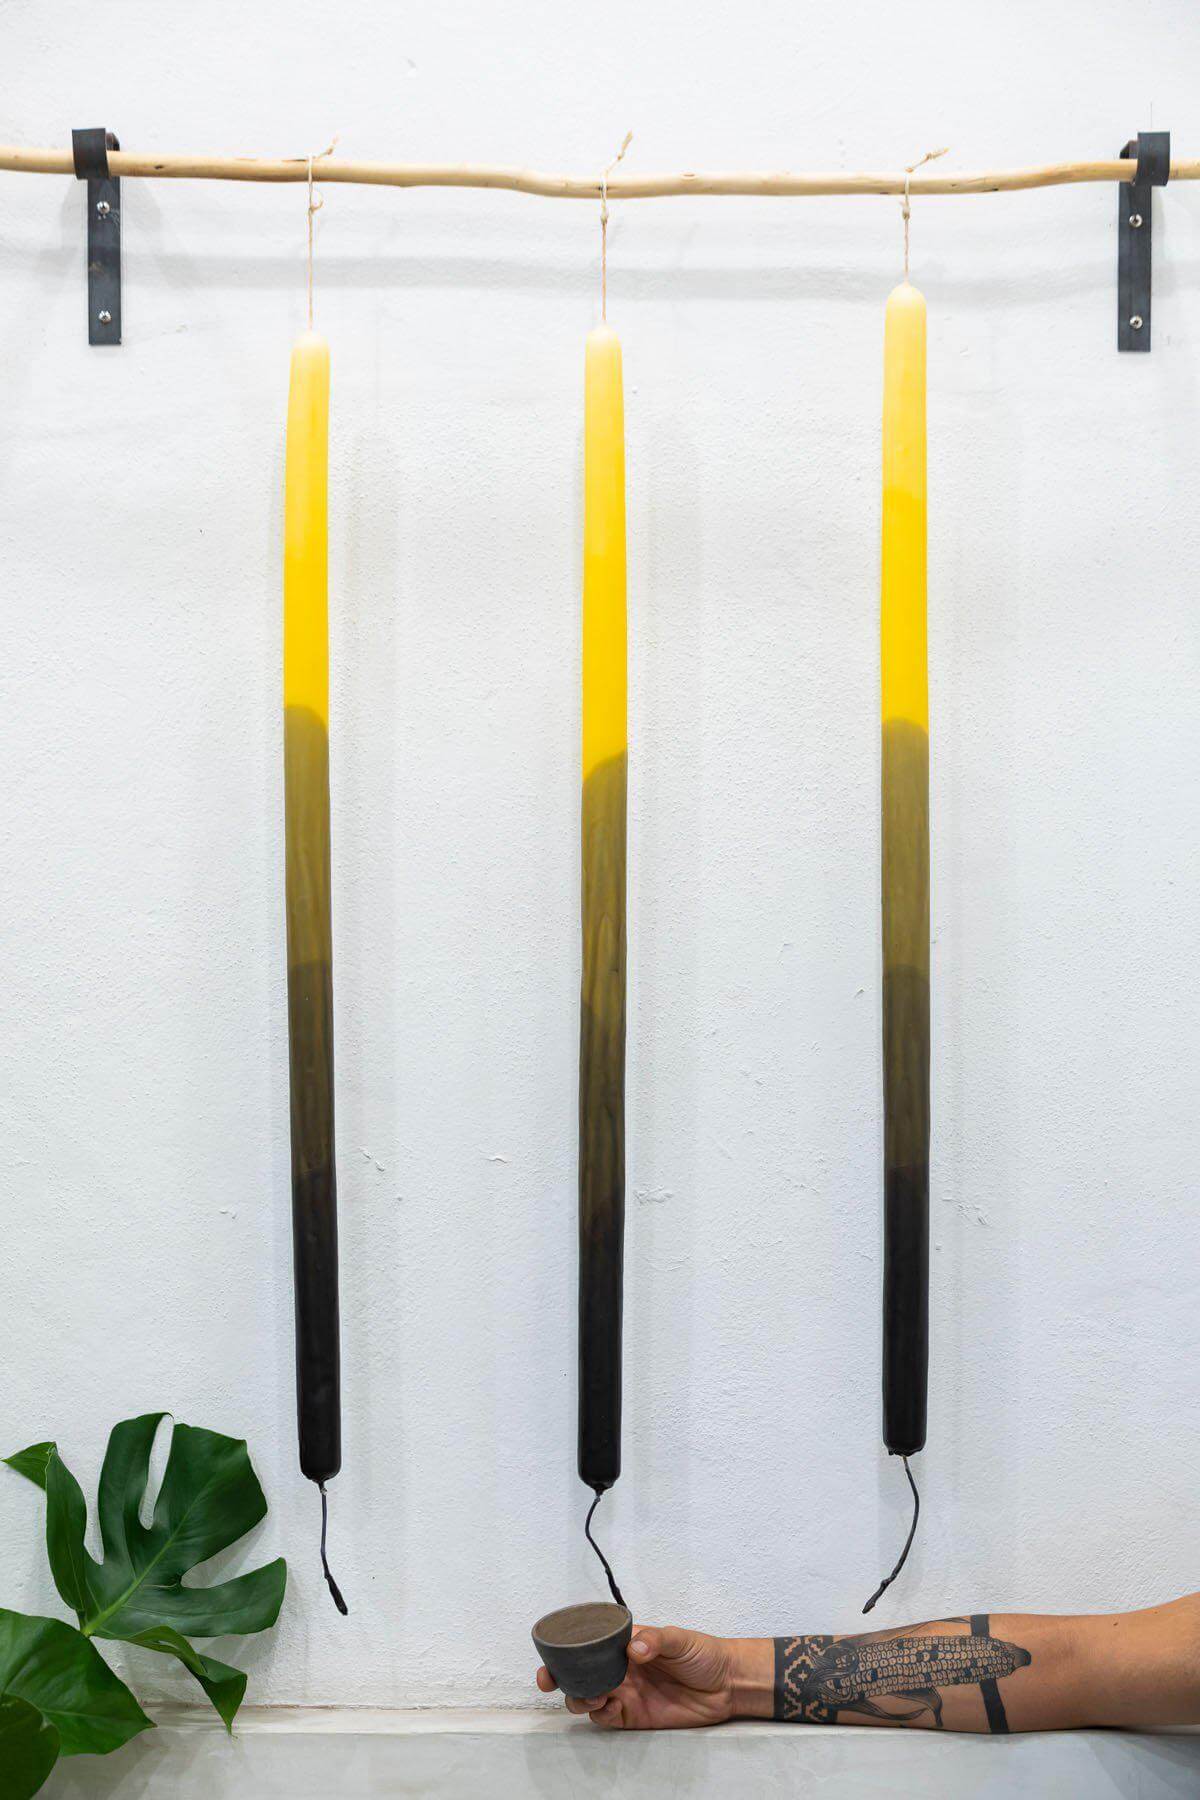 Handcrafted in Oaxaca, this big candle displays unique dripping wax details.